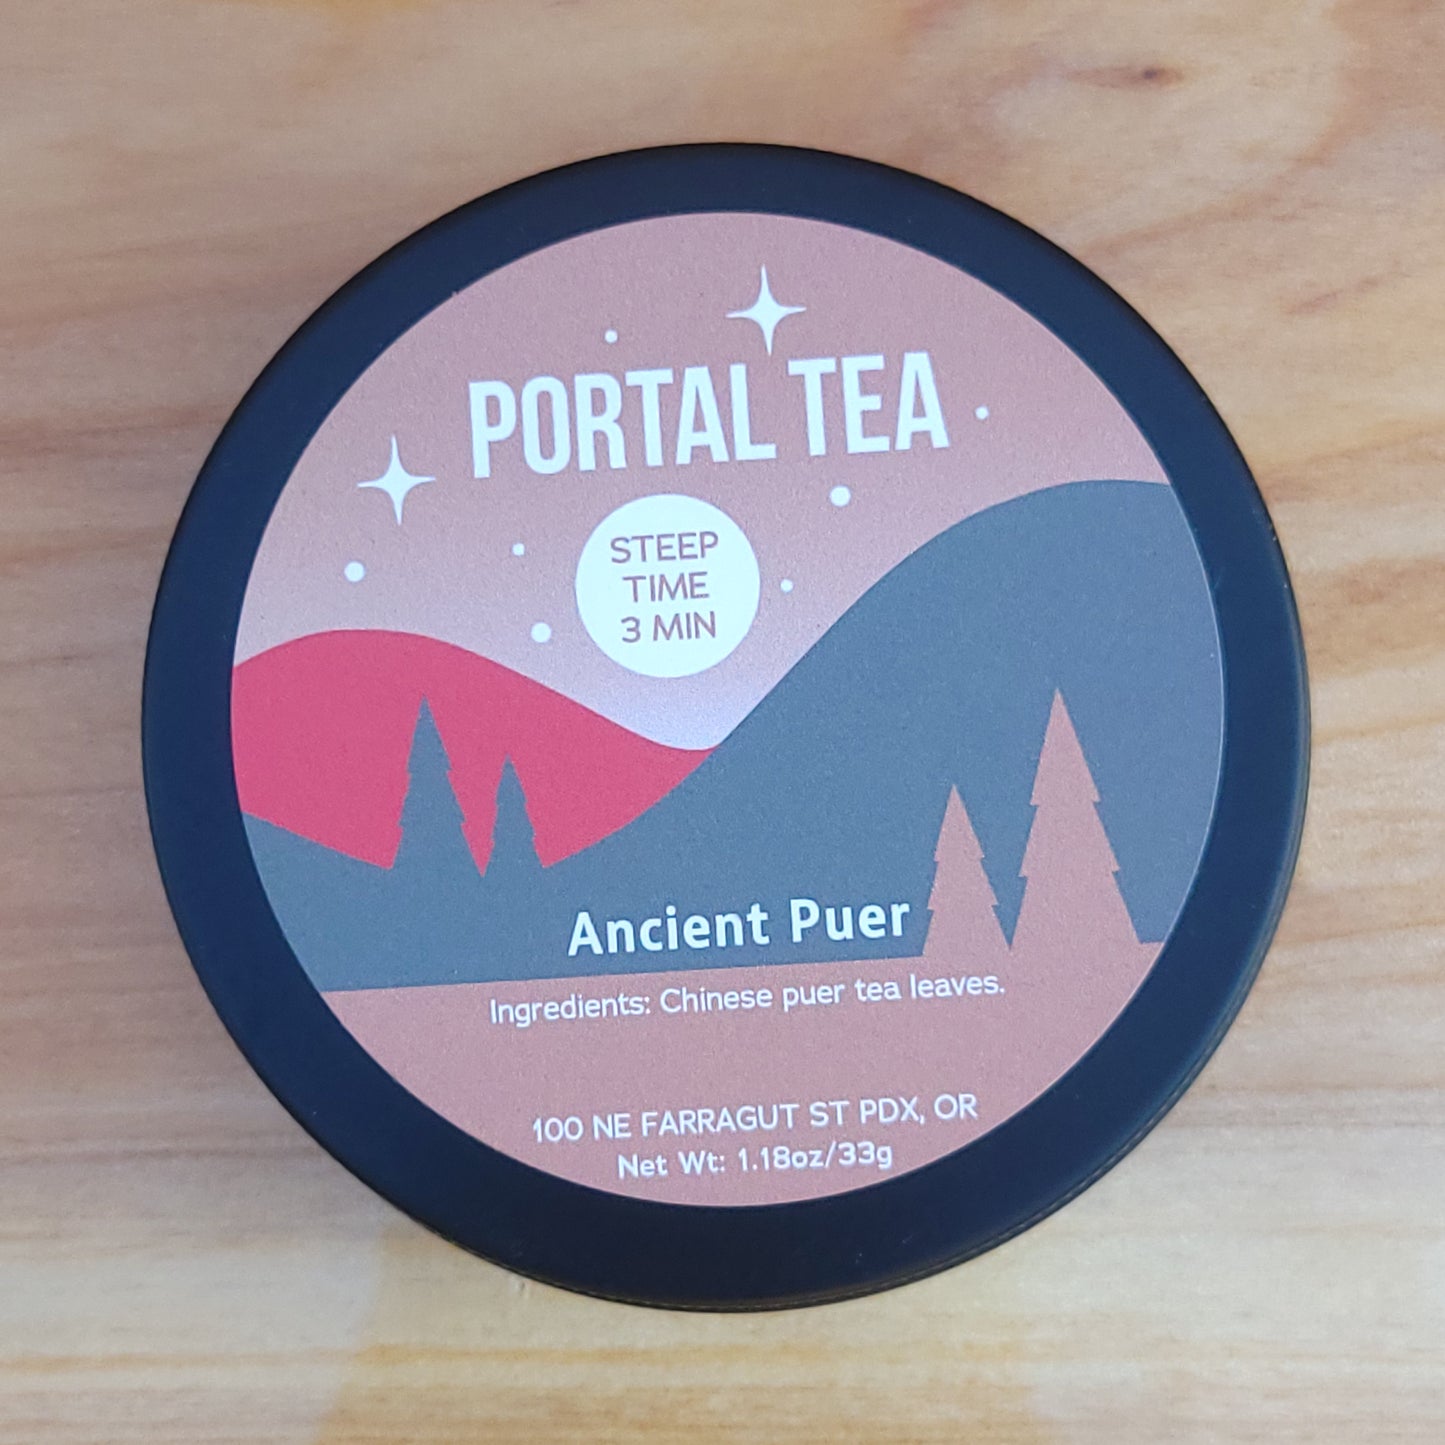 Ancient Puer